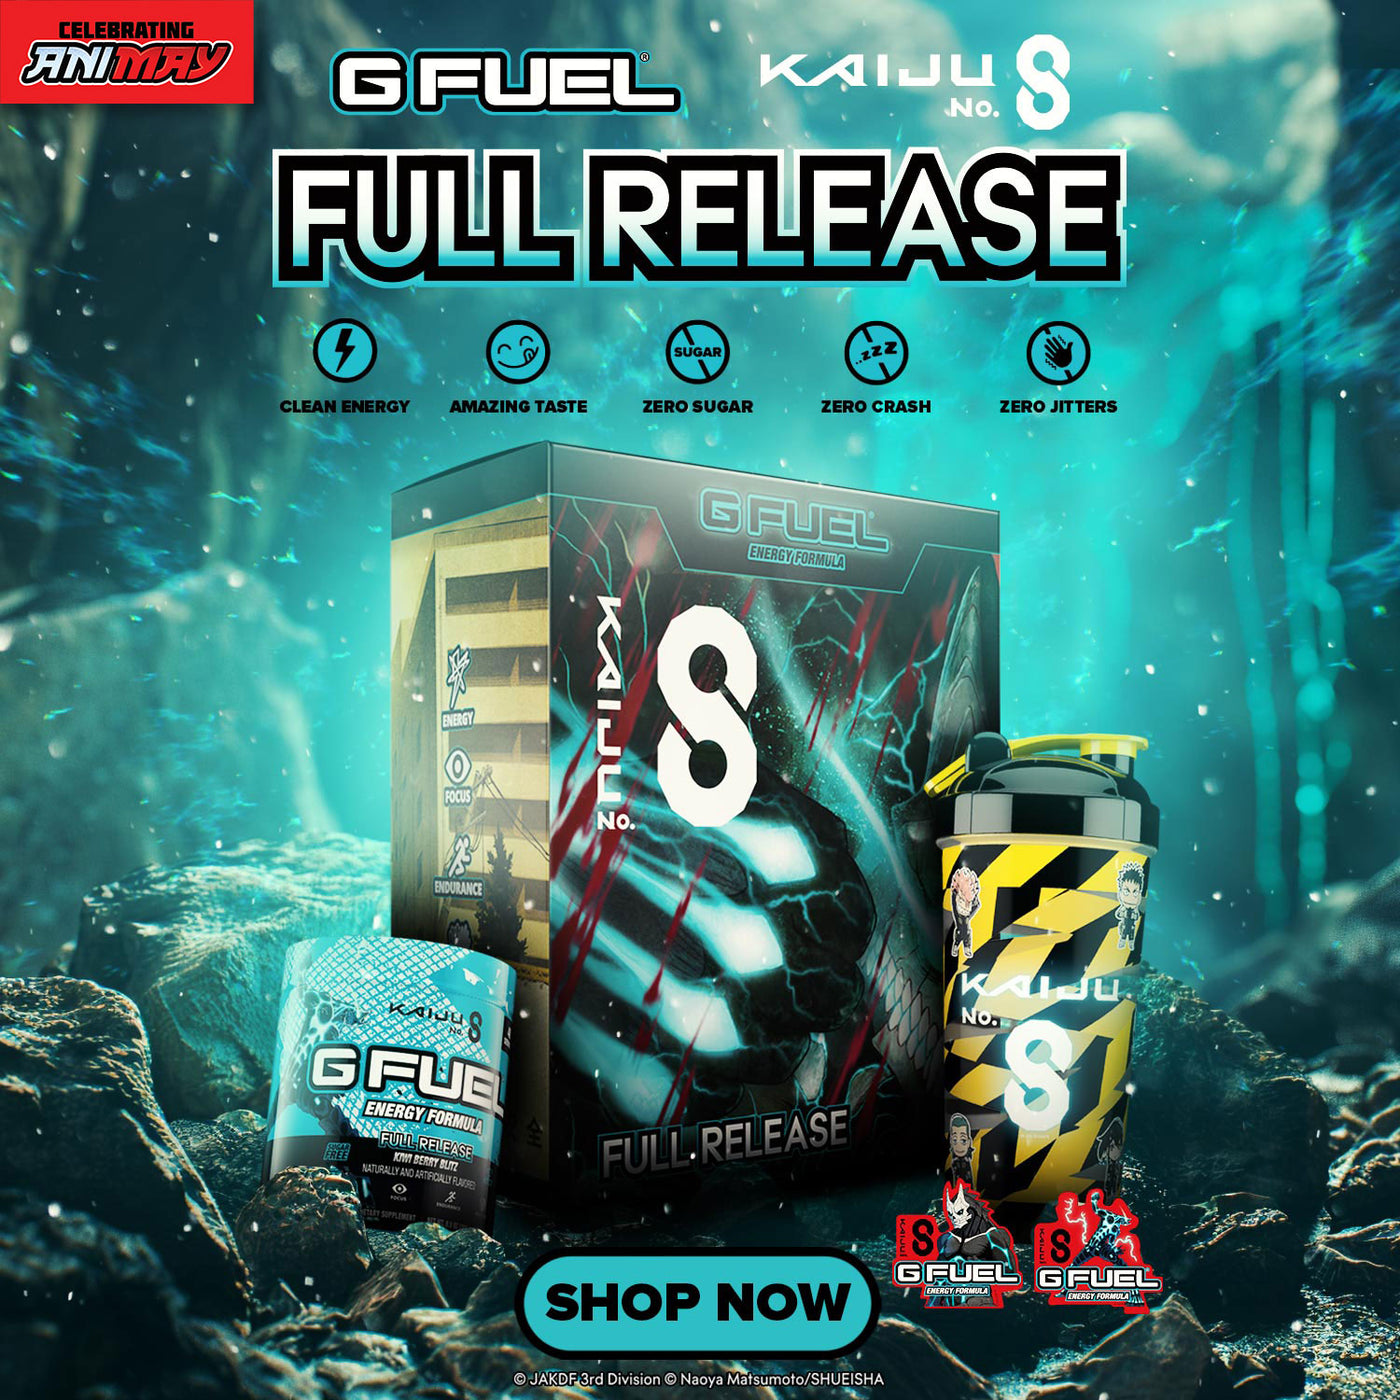 Kaiju No. 8 Anime Collector's Box | Powdered Energy Drink | Shaker cup & Stickers